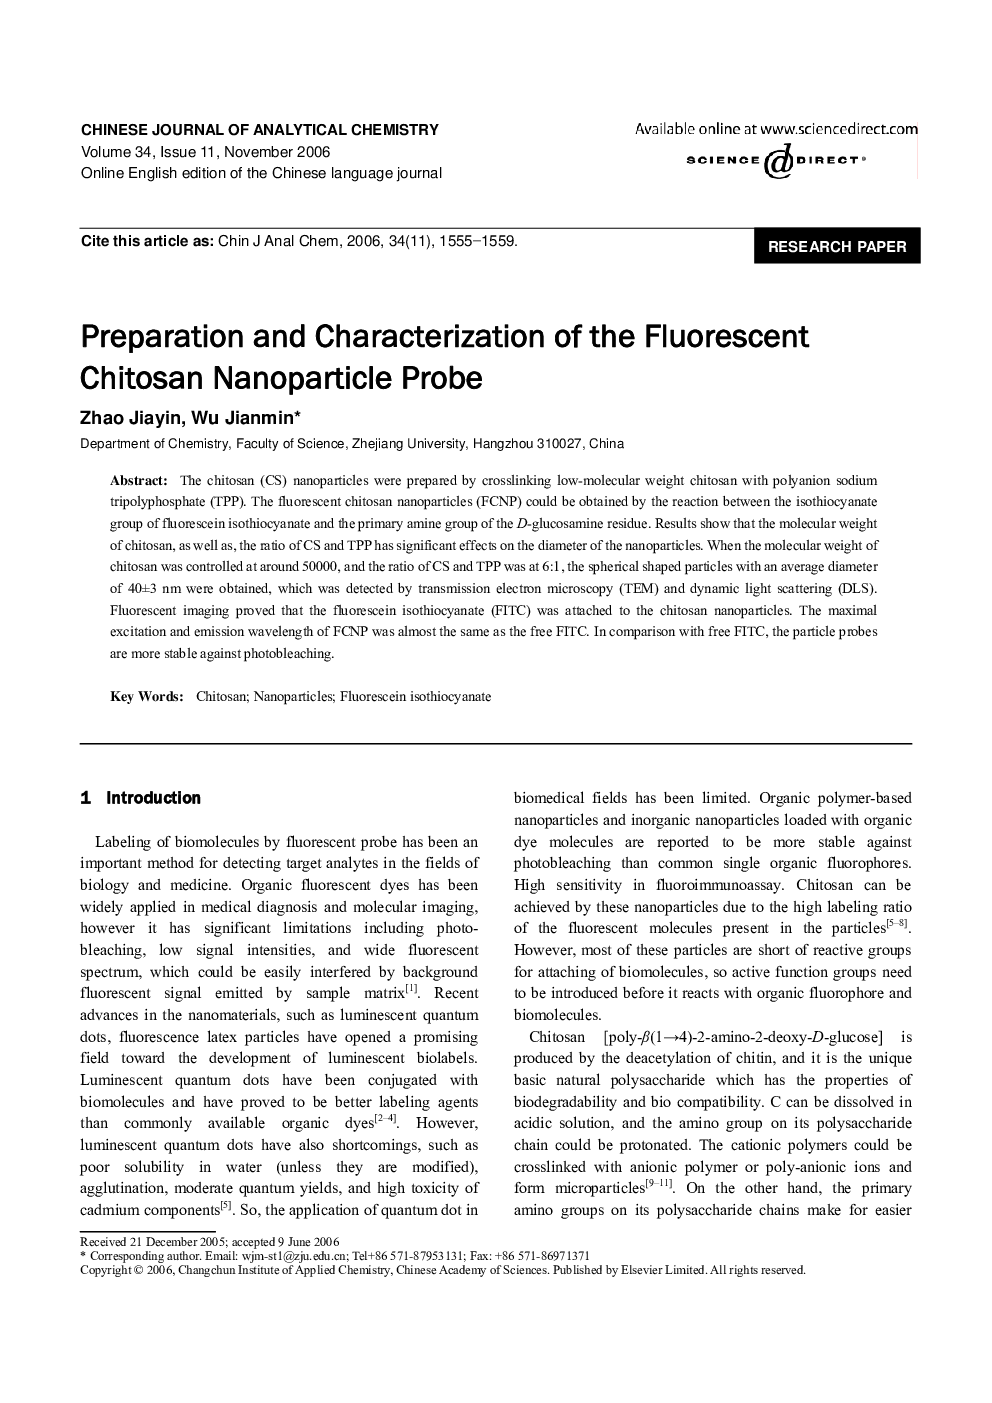 Preparation and Characterization of the Fluorescent Chitosan Nanoparticle Probe